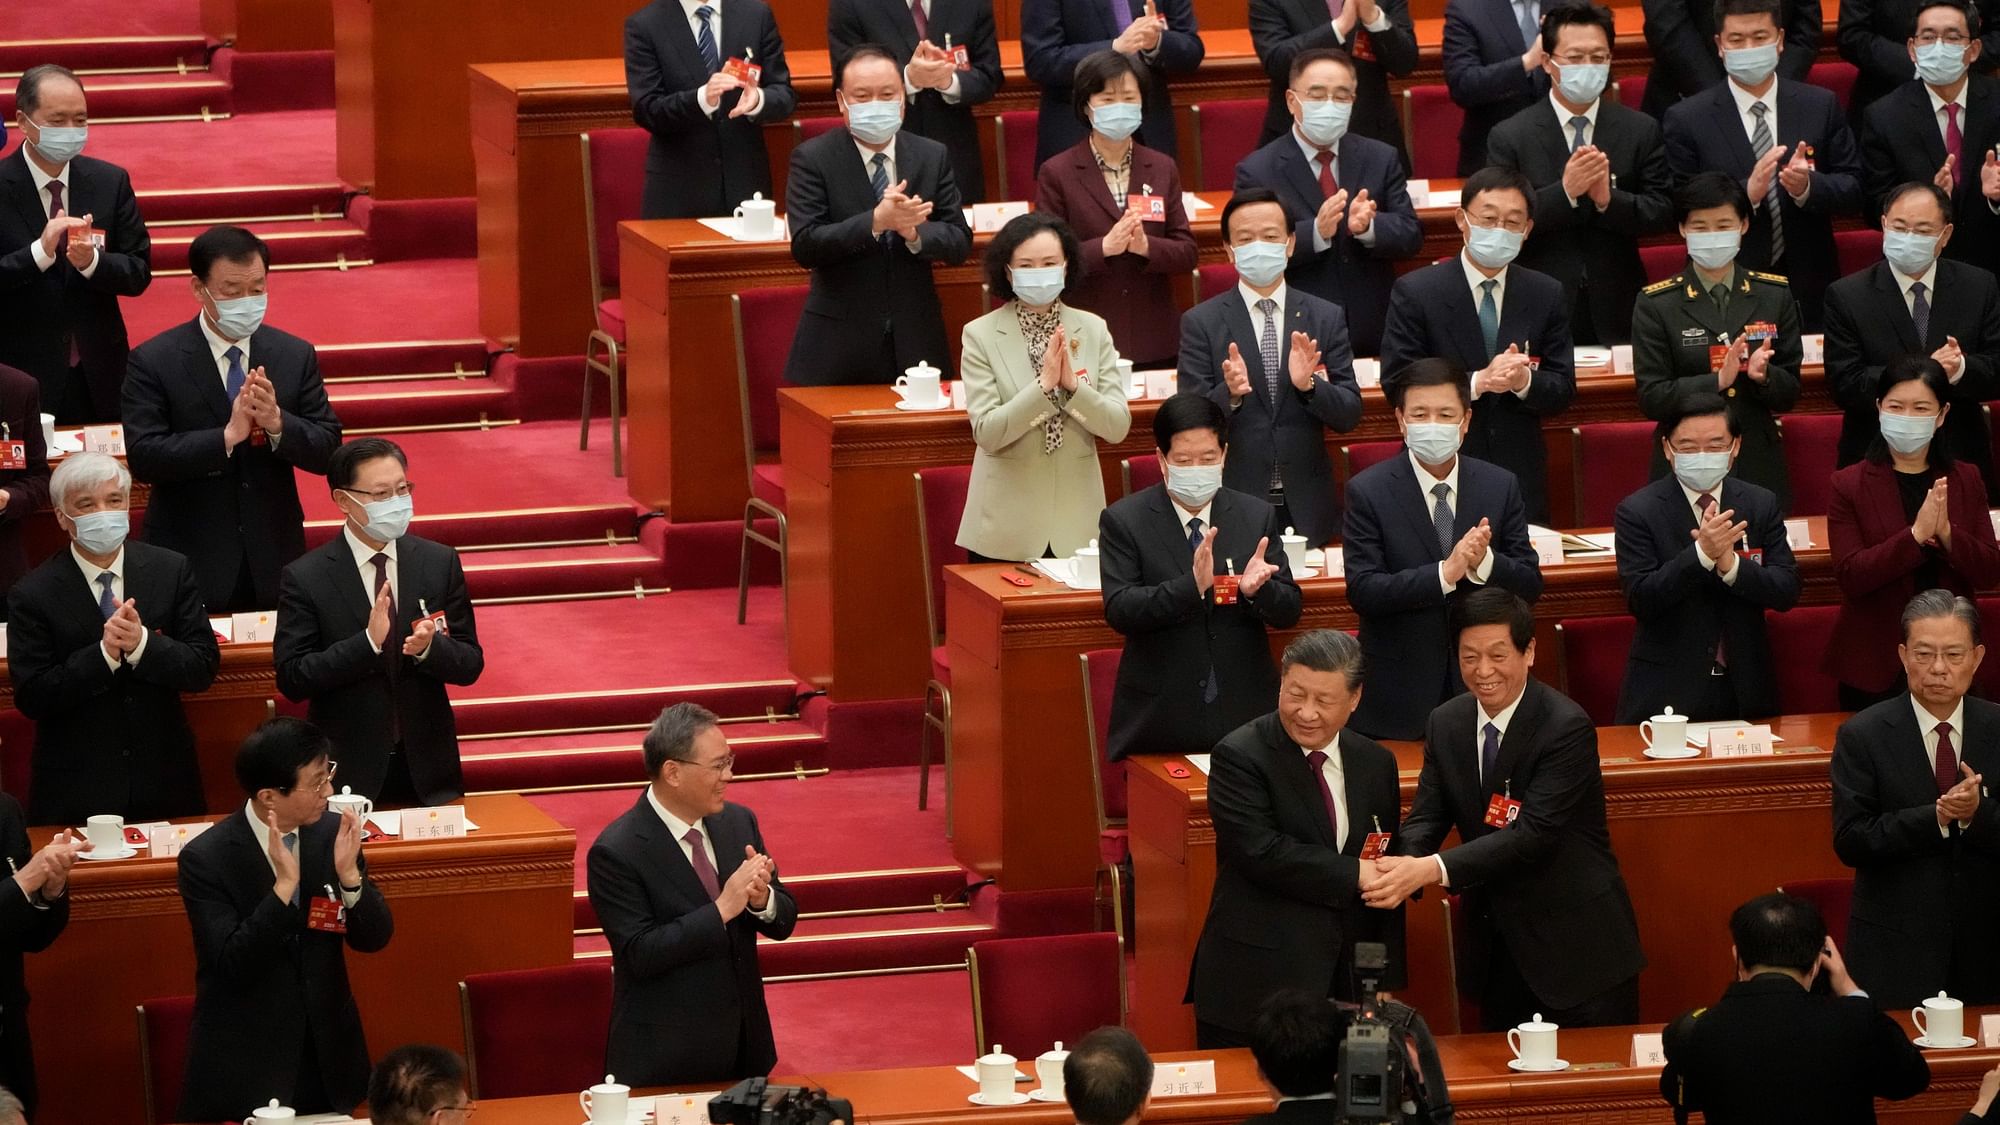 <div class="paragraphs"><p>Chinese President Xi Jinping is congratulated by Li Zhanshu as other delegates applaud after he is unanimously elected as President during a session of Chinas National People's Congress (NPC) at the Great Hall of the People in Beijing, on Friday, 10 March.</p></div>